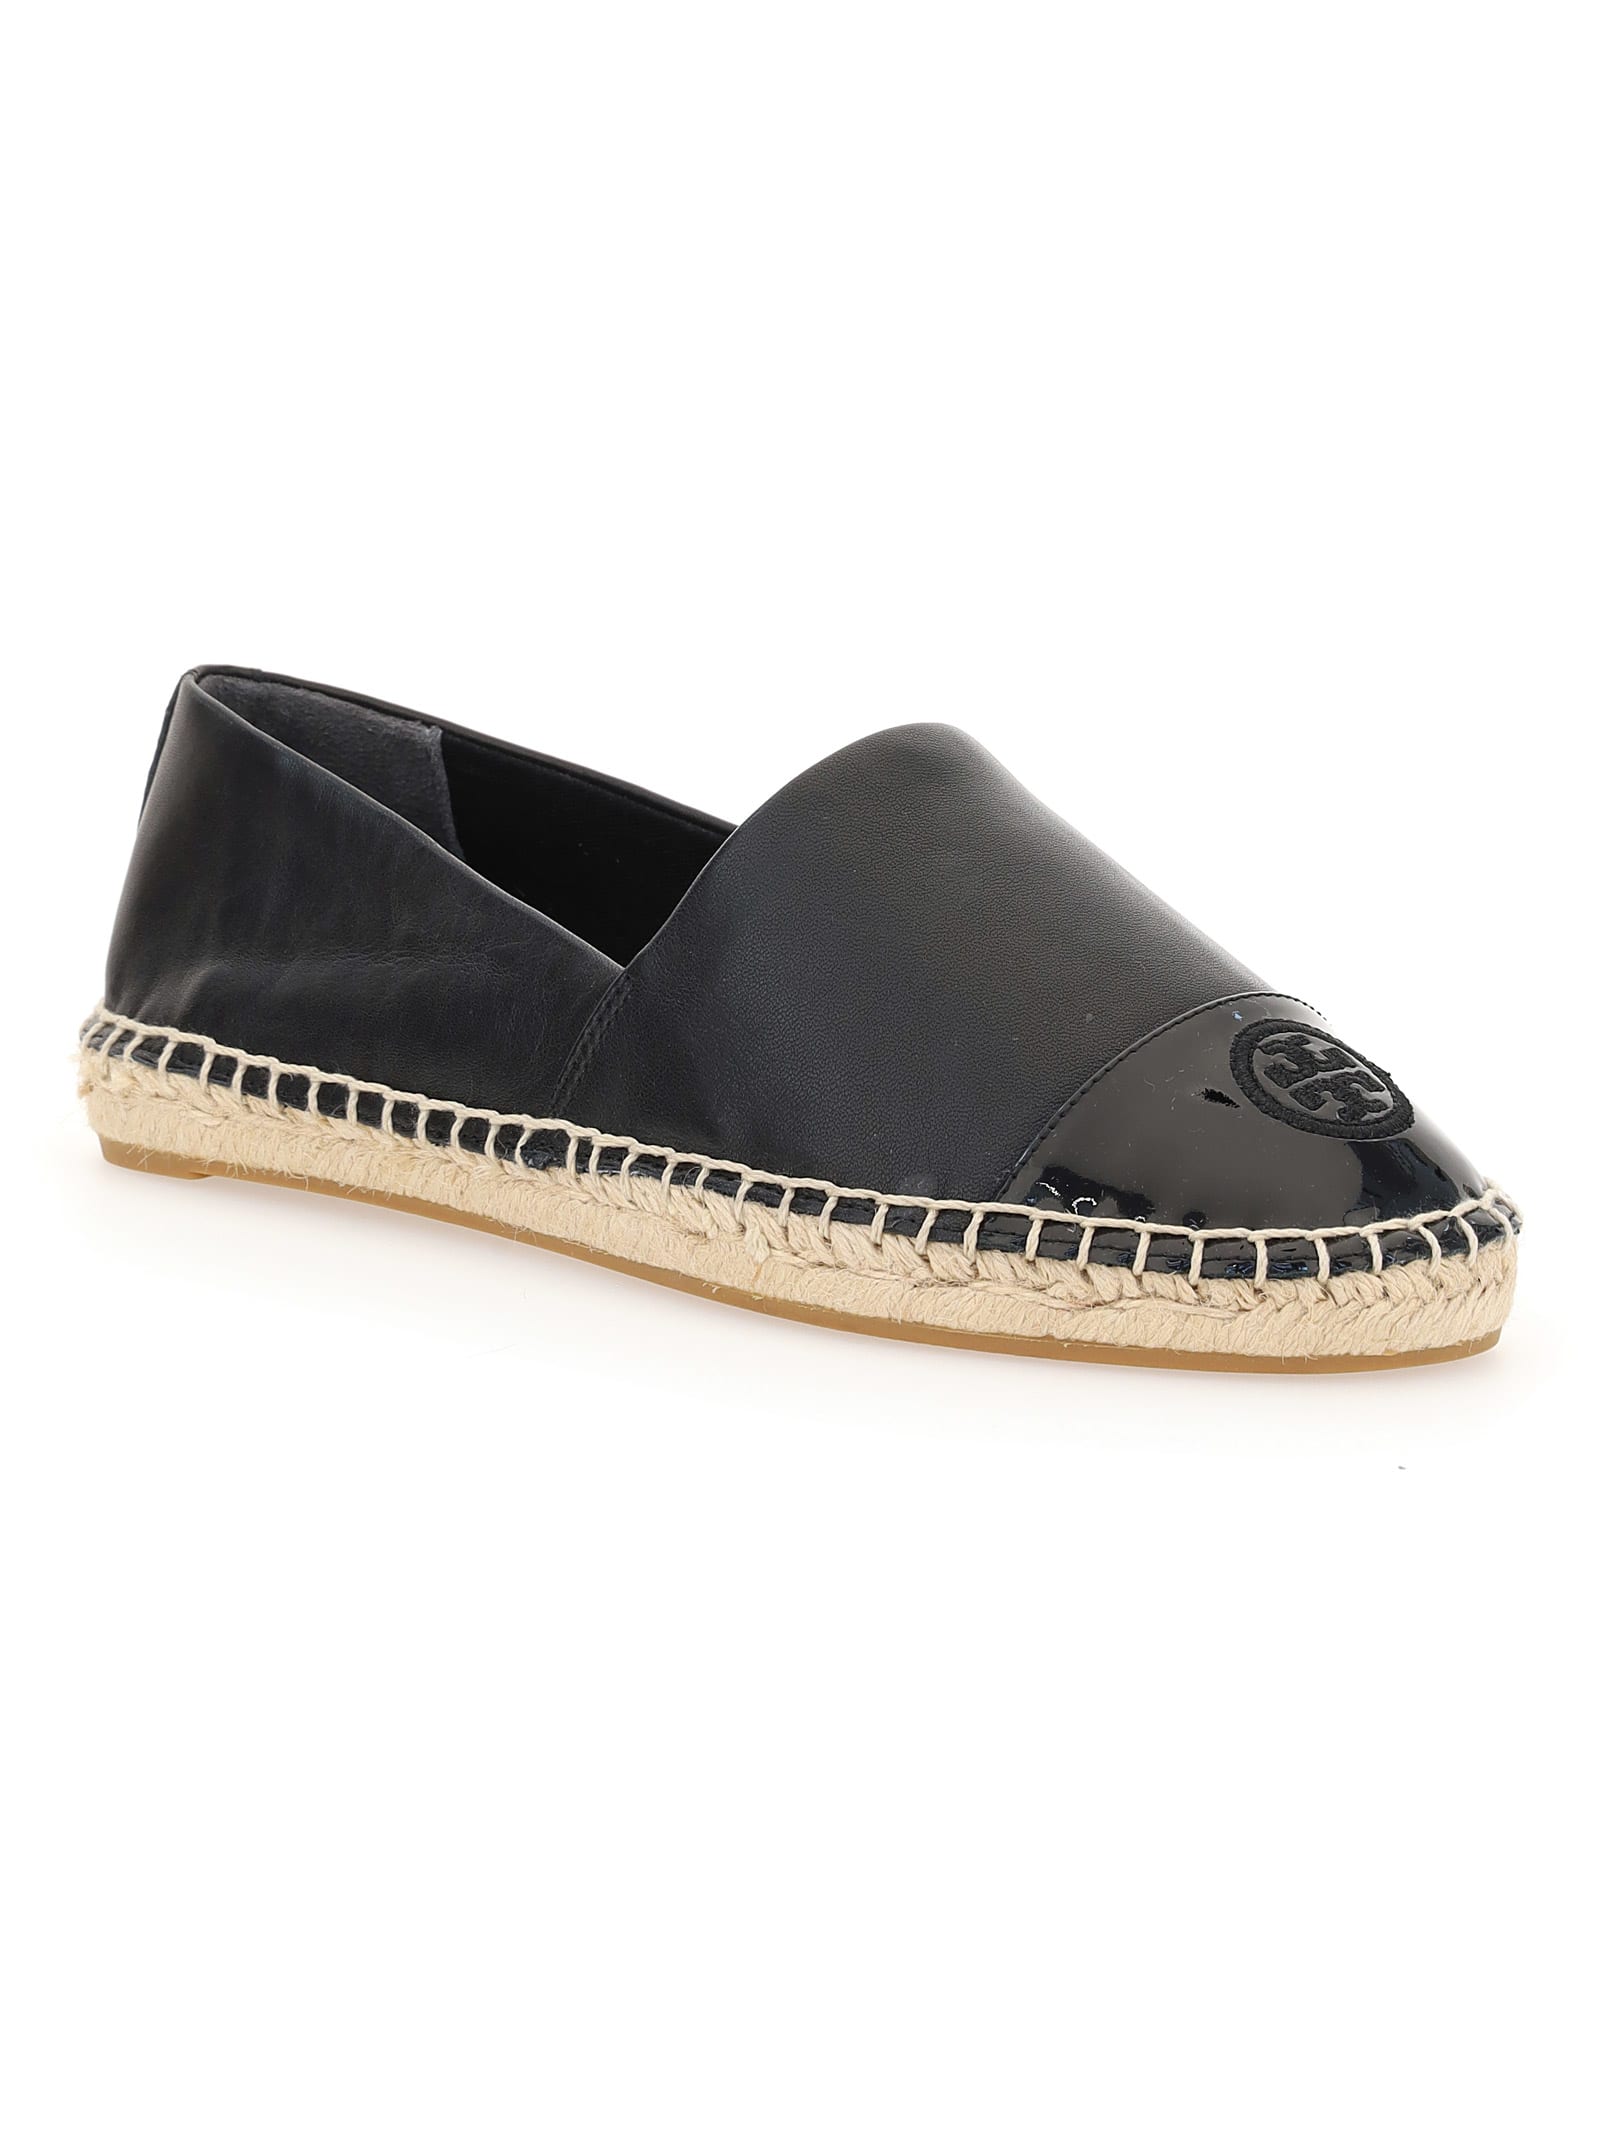 tory burch espadrilles leather